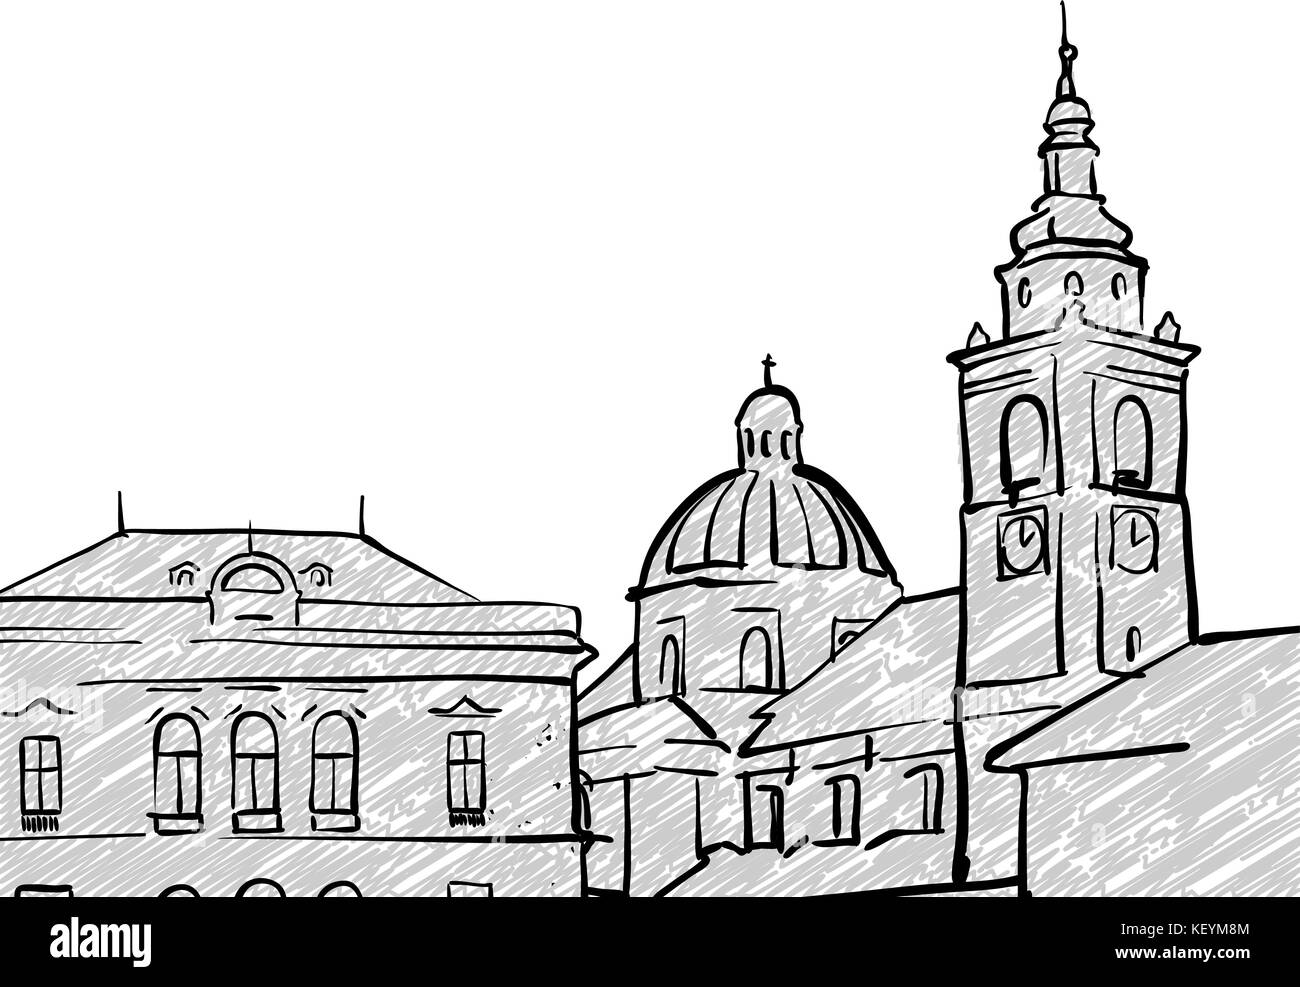 Ljubljana, Slovenia famous Travel Sketch. Lineart drawing by hand. Greeting card design, vector illustration Stock Vector